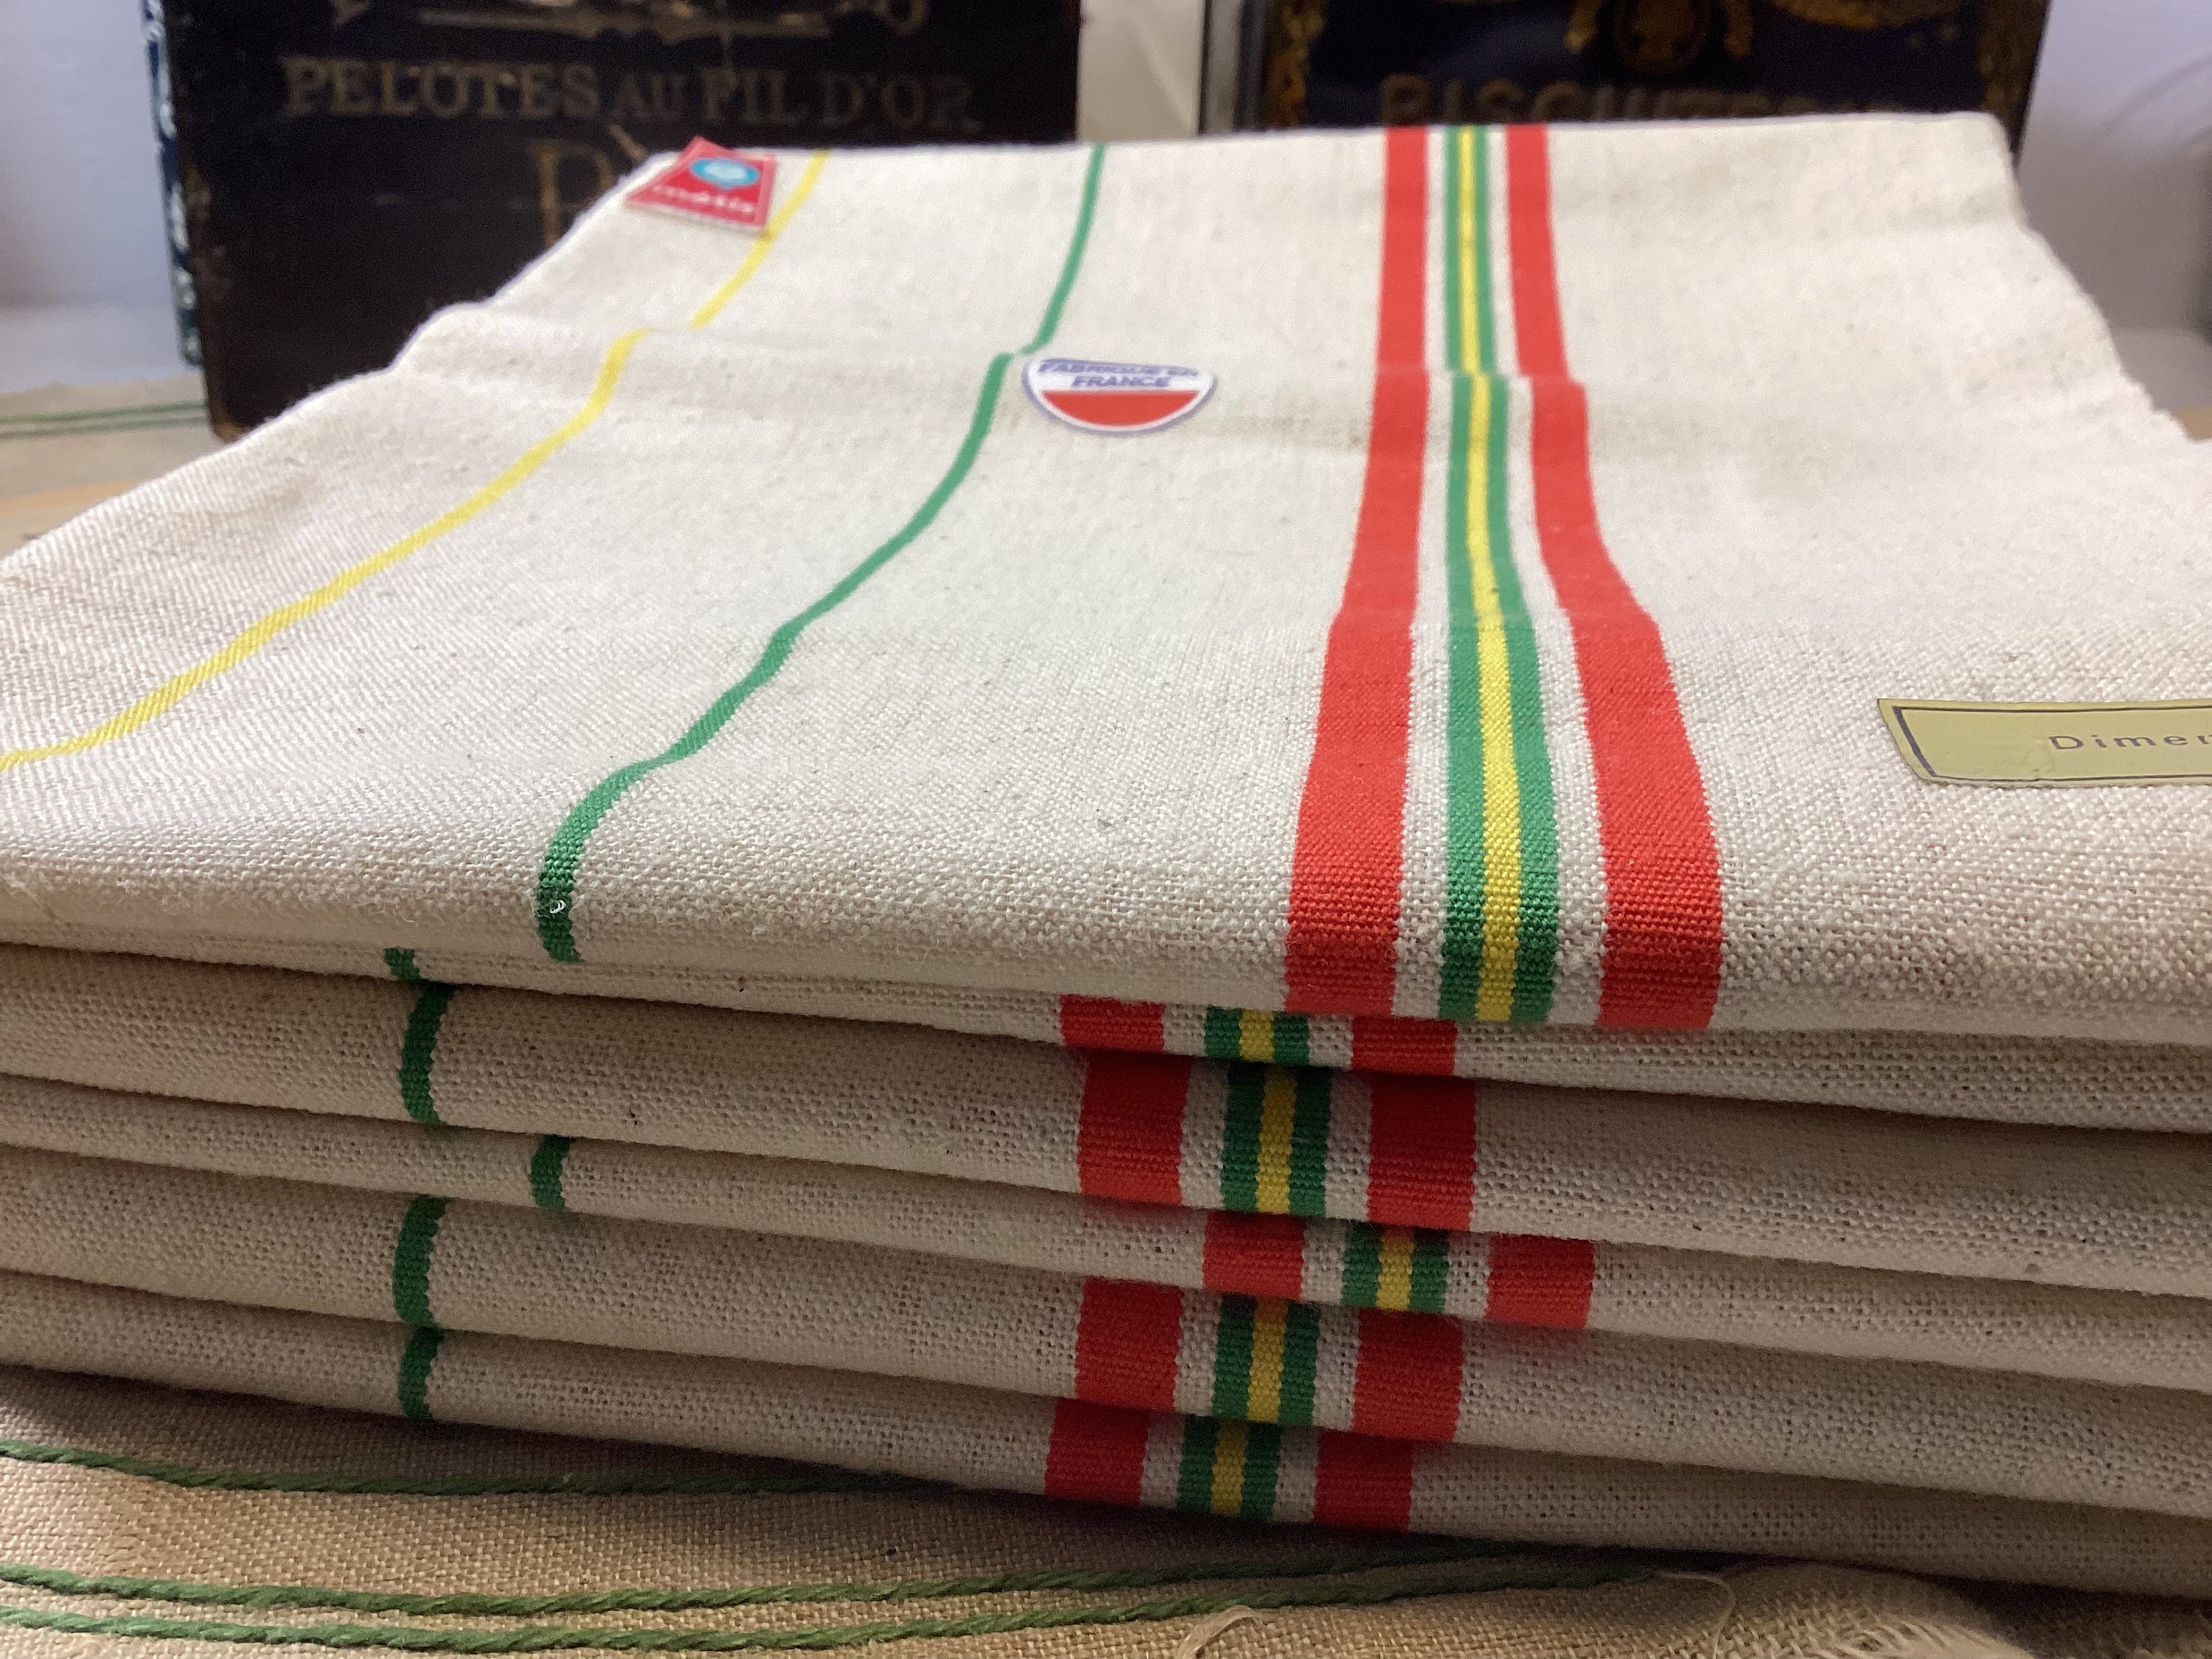 Dish Towel, Blue Check with Red Stripe – Chinaberry Tree Linens and Gifts